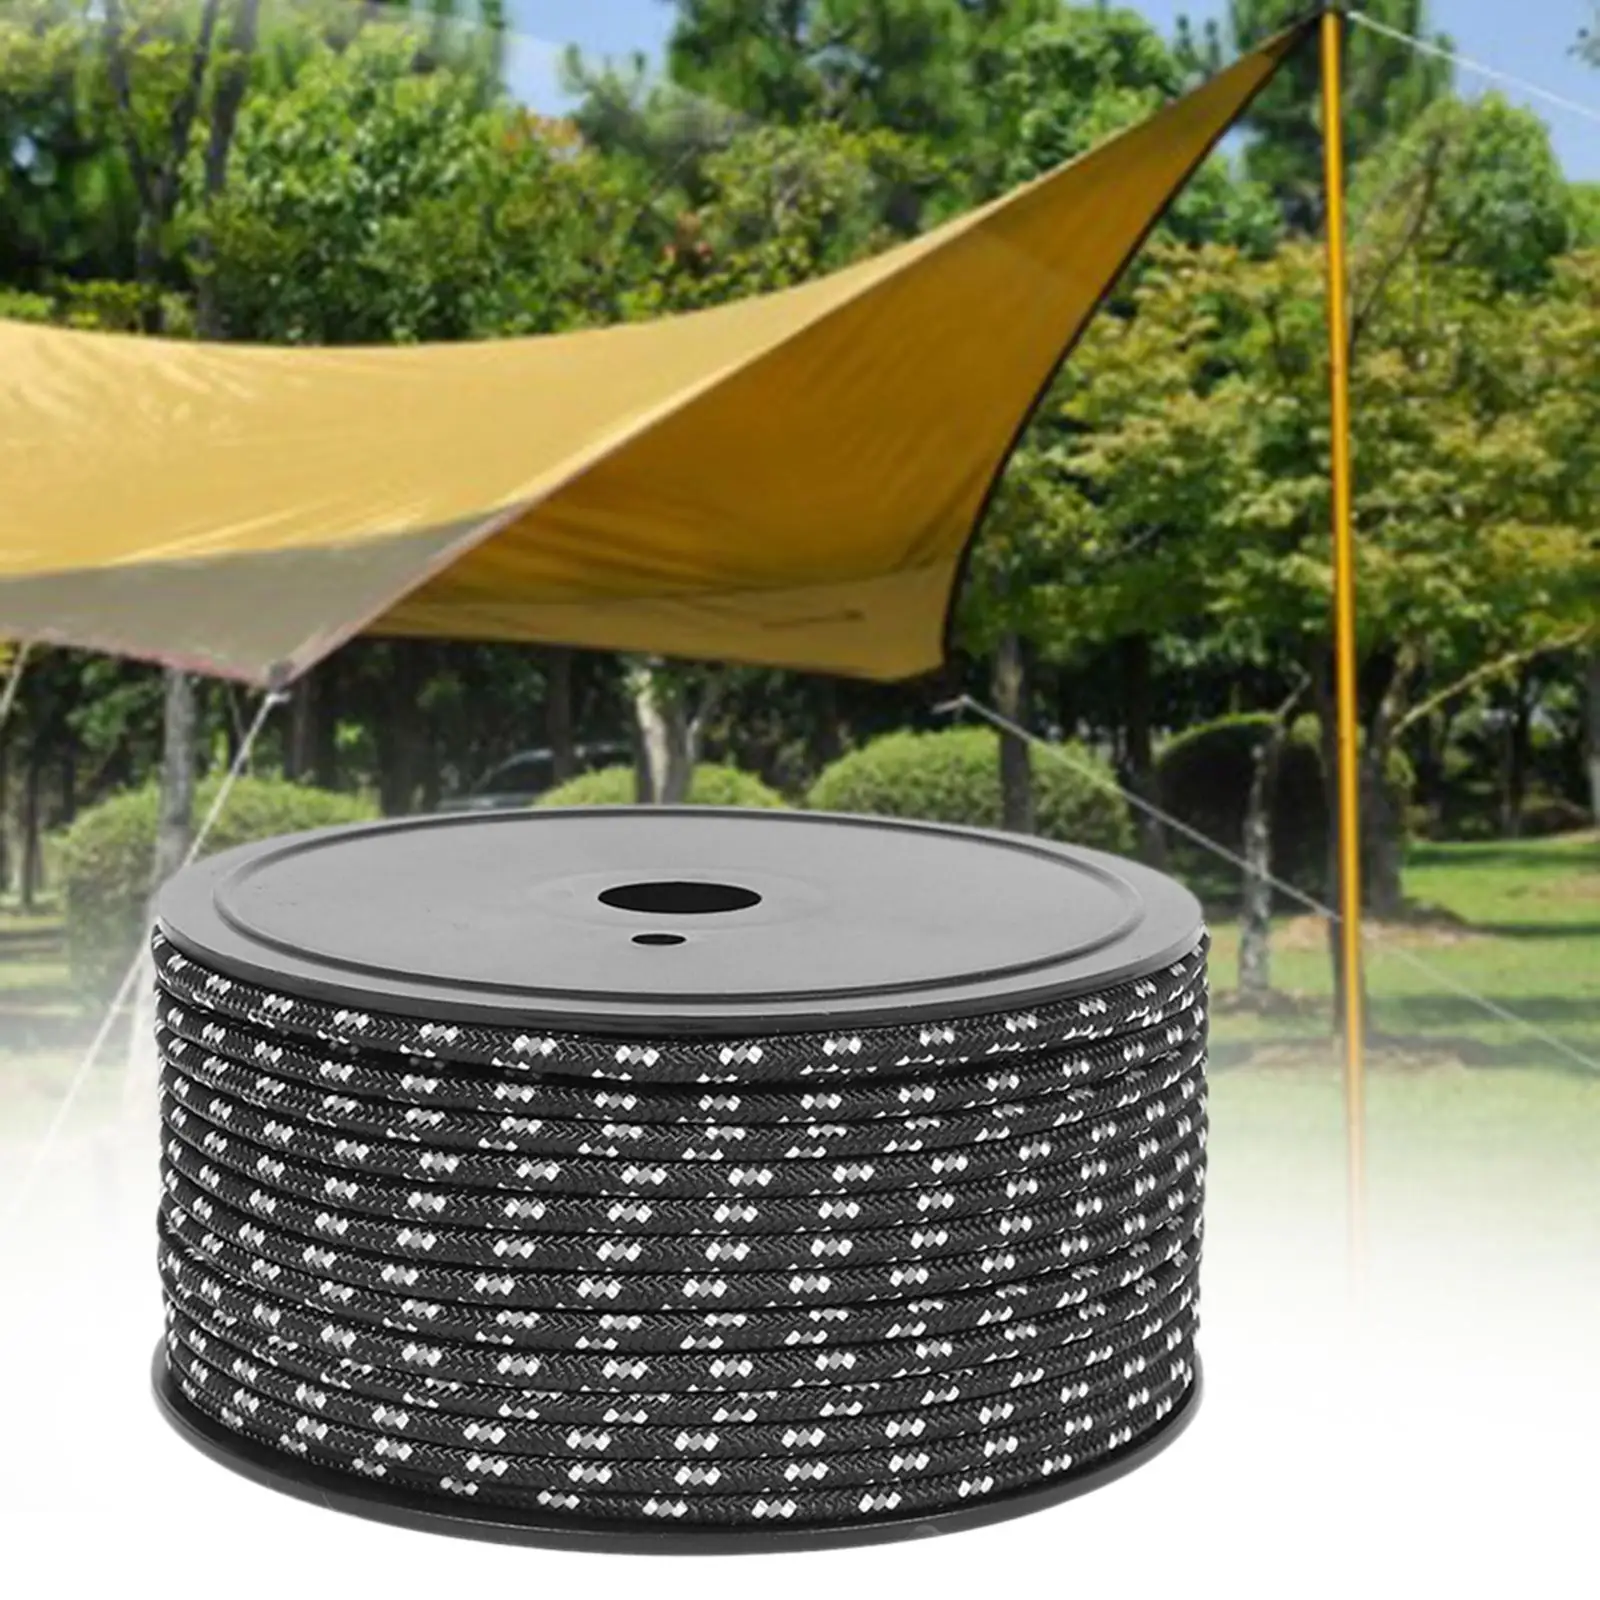 Camping tent rope, outdoor guy lines, 4mm thickness, camping rope, tent wind